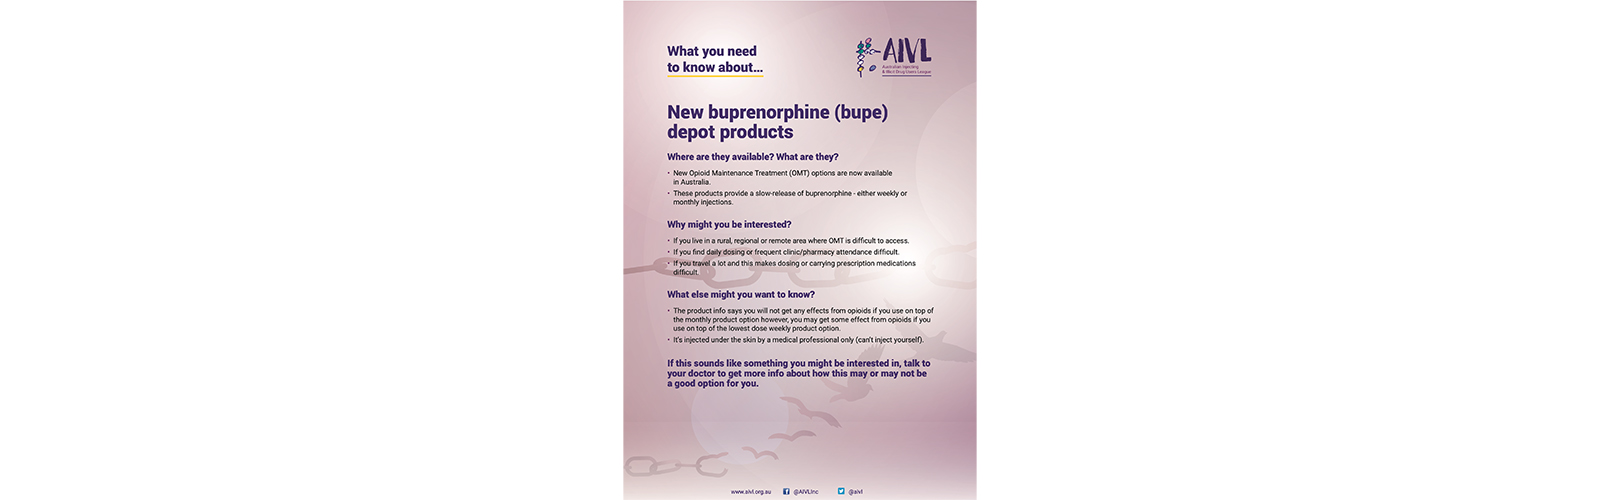 Featured image for “New buprenorphine (Bupe) depot products”